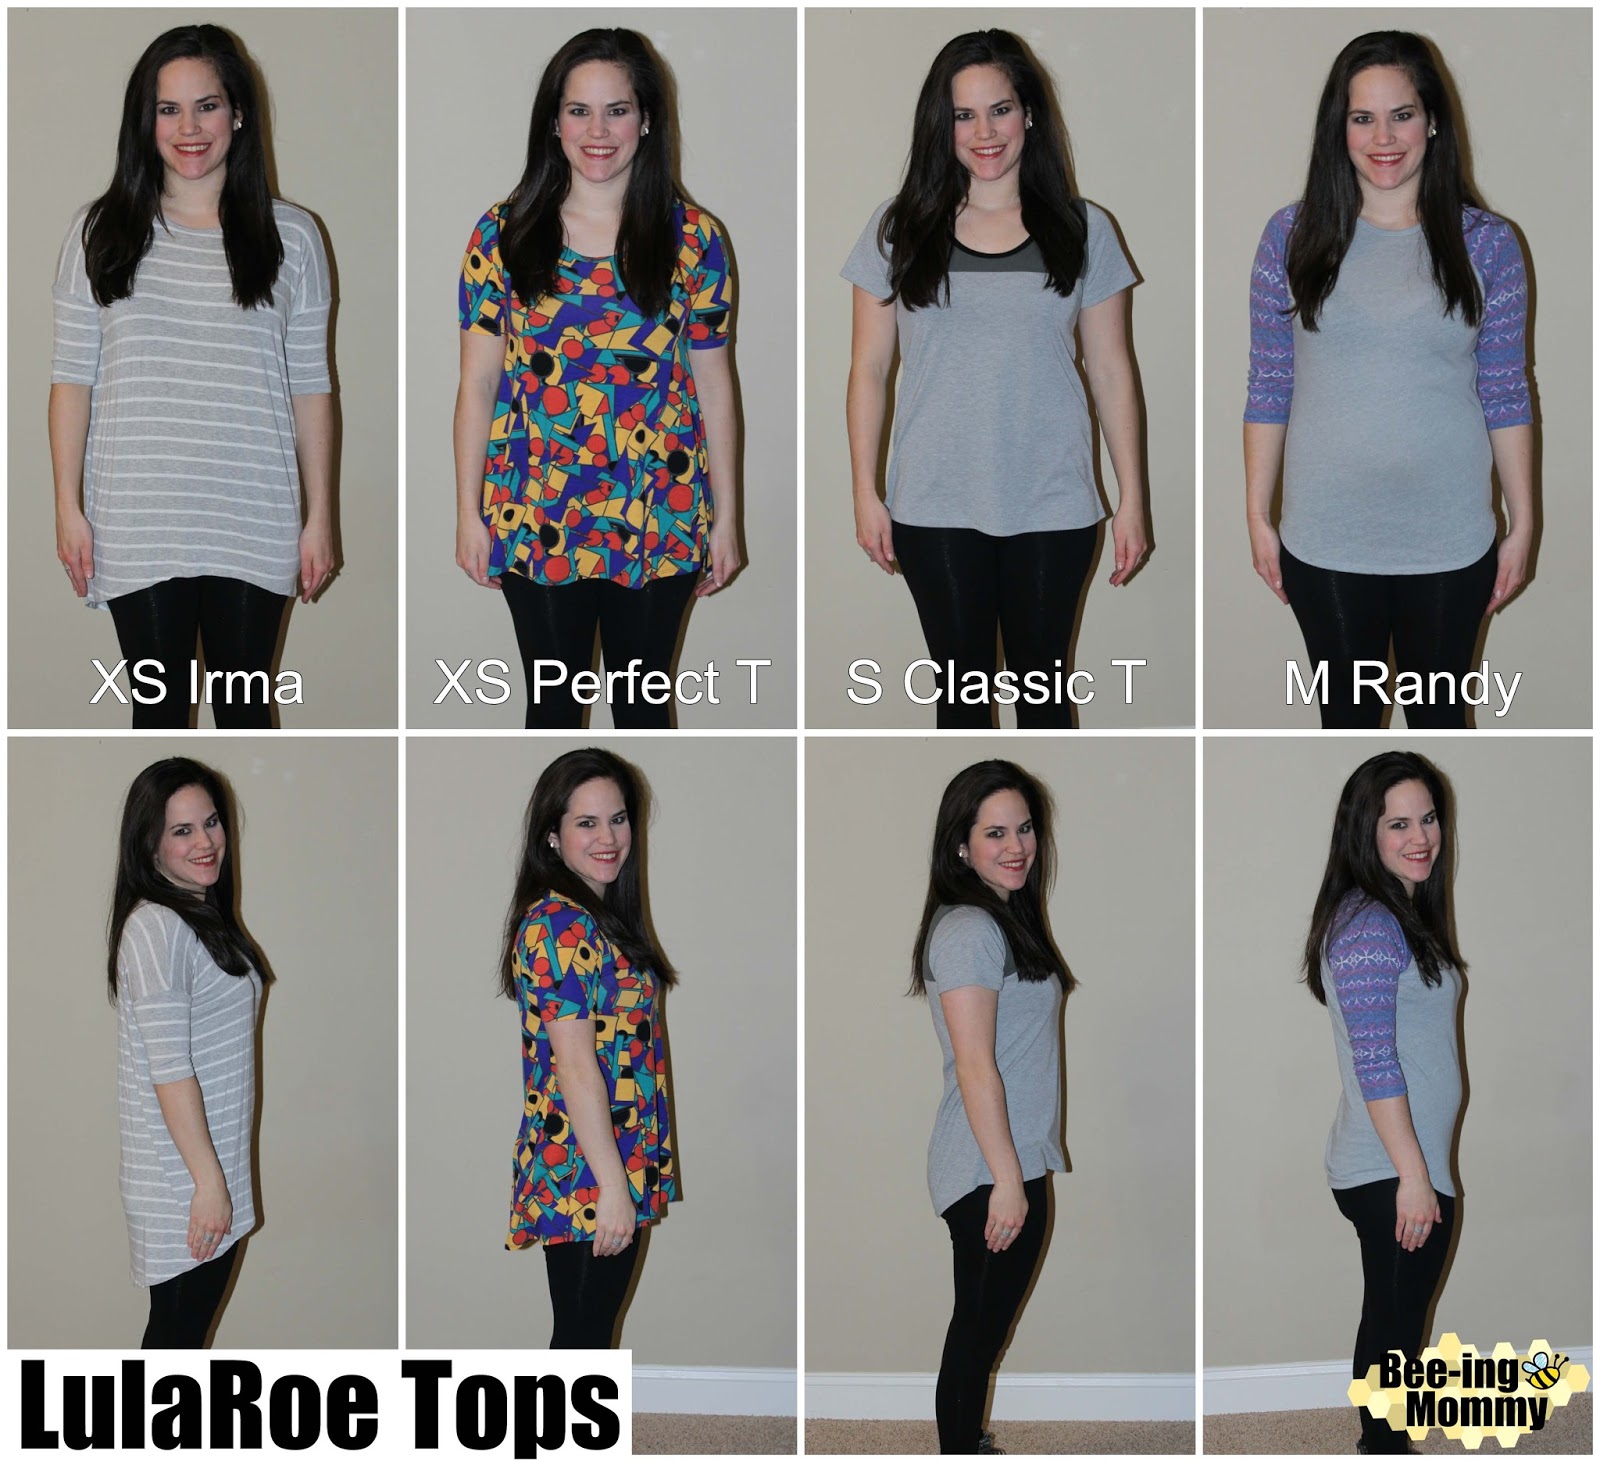 LulaRoe Part 3: Tops - different ways to style Irma, Perfect T